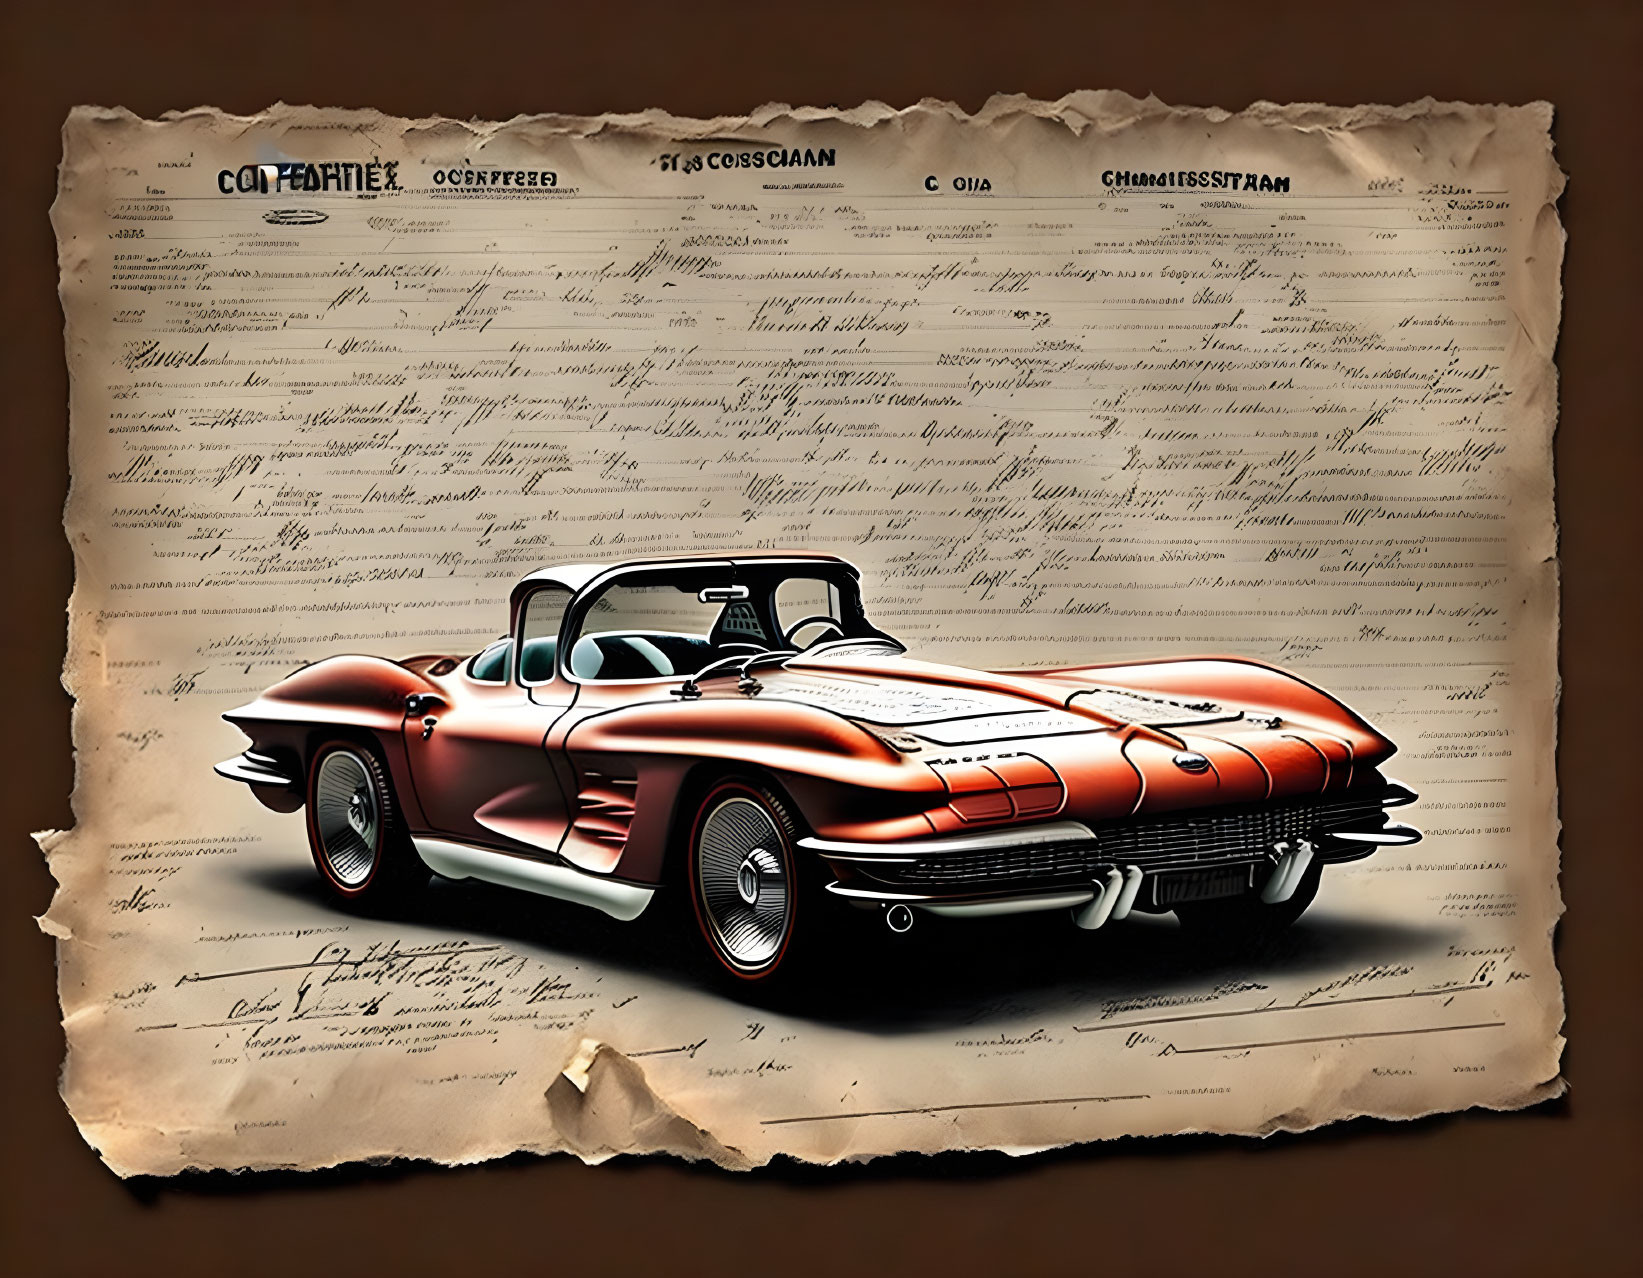 Classic Red and White Corvette Vintage-Style Illustration on Parchment Background